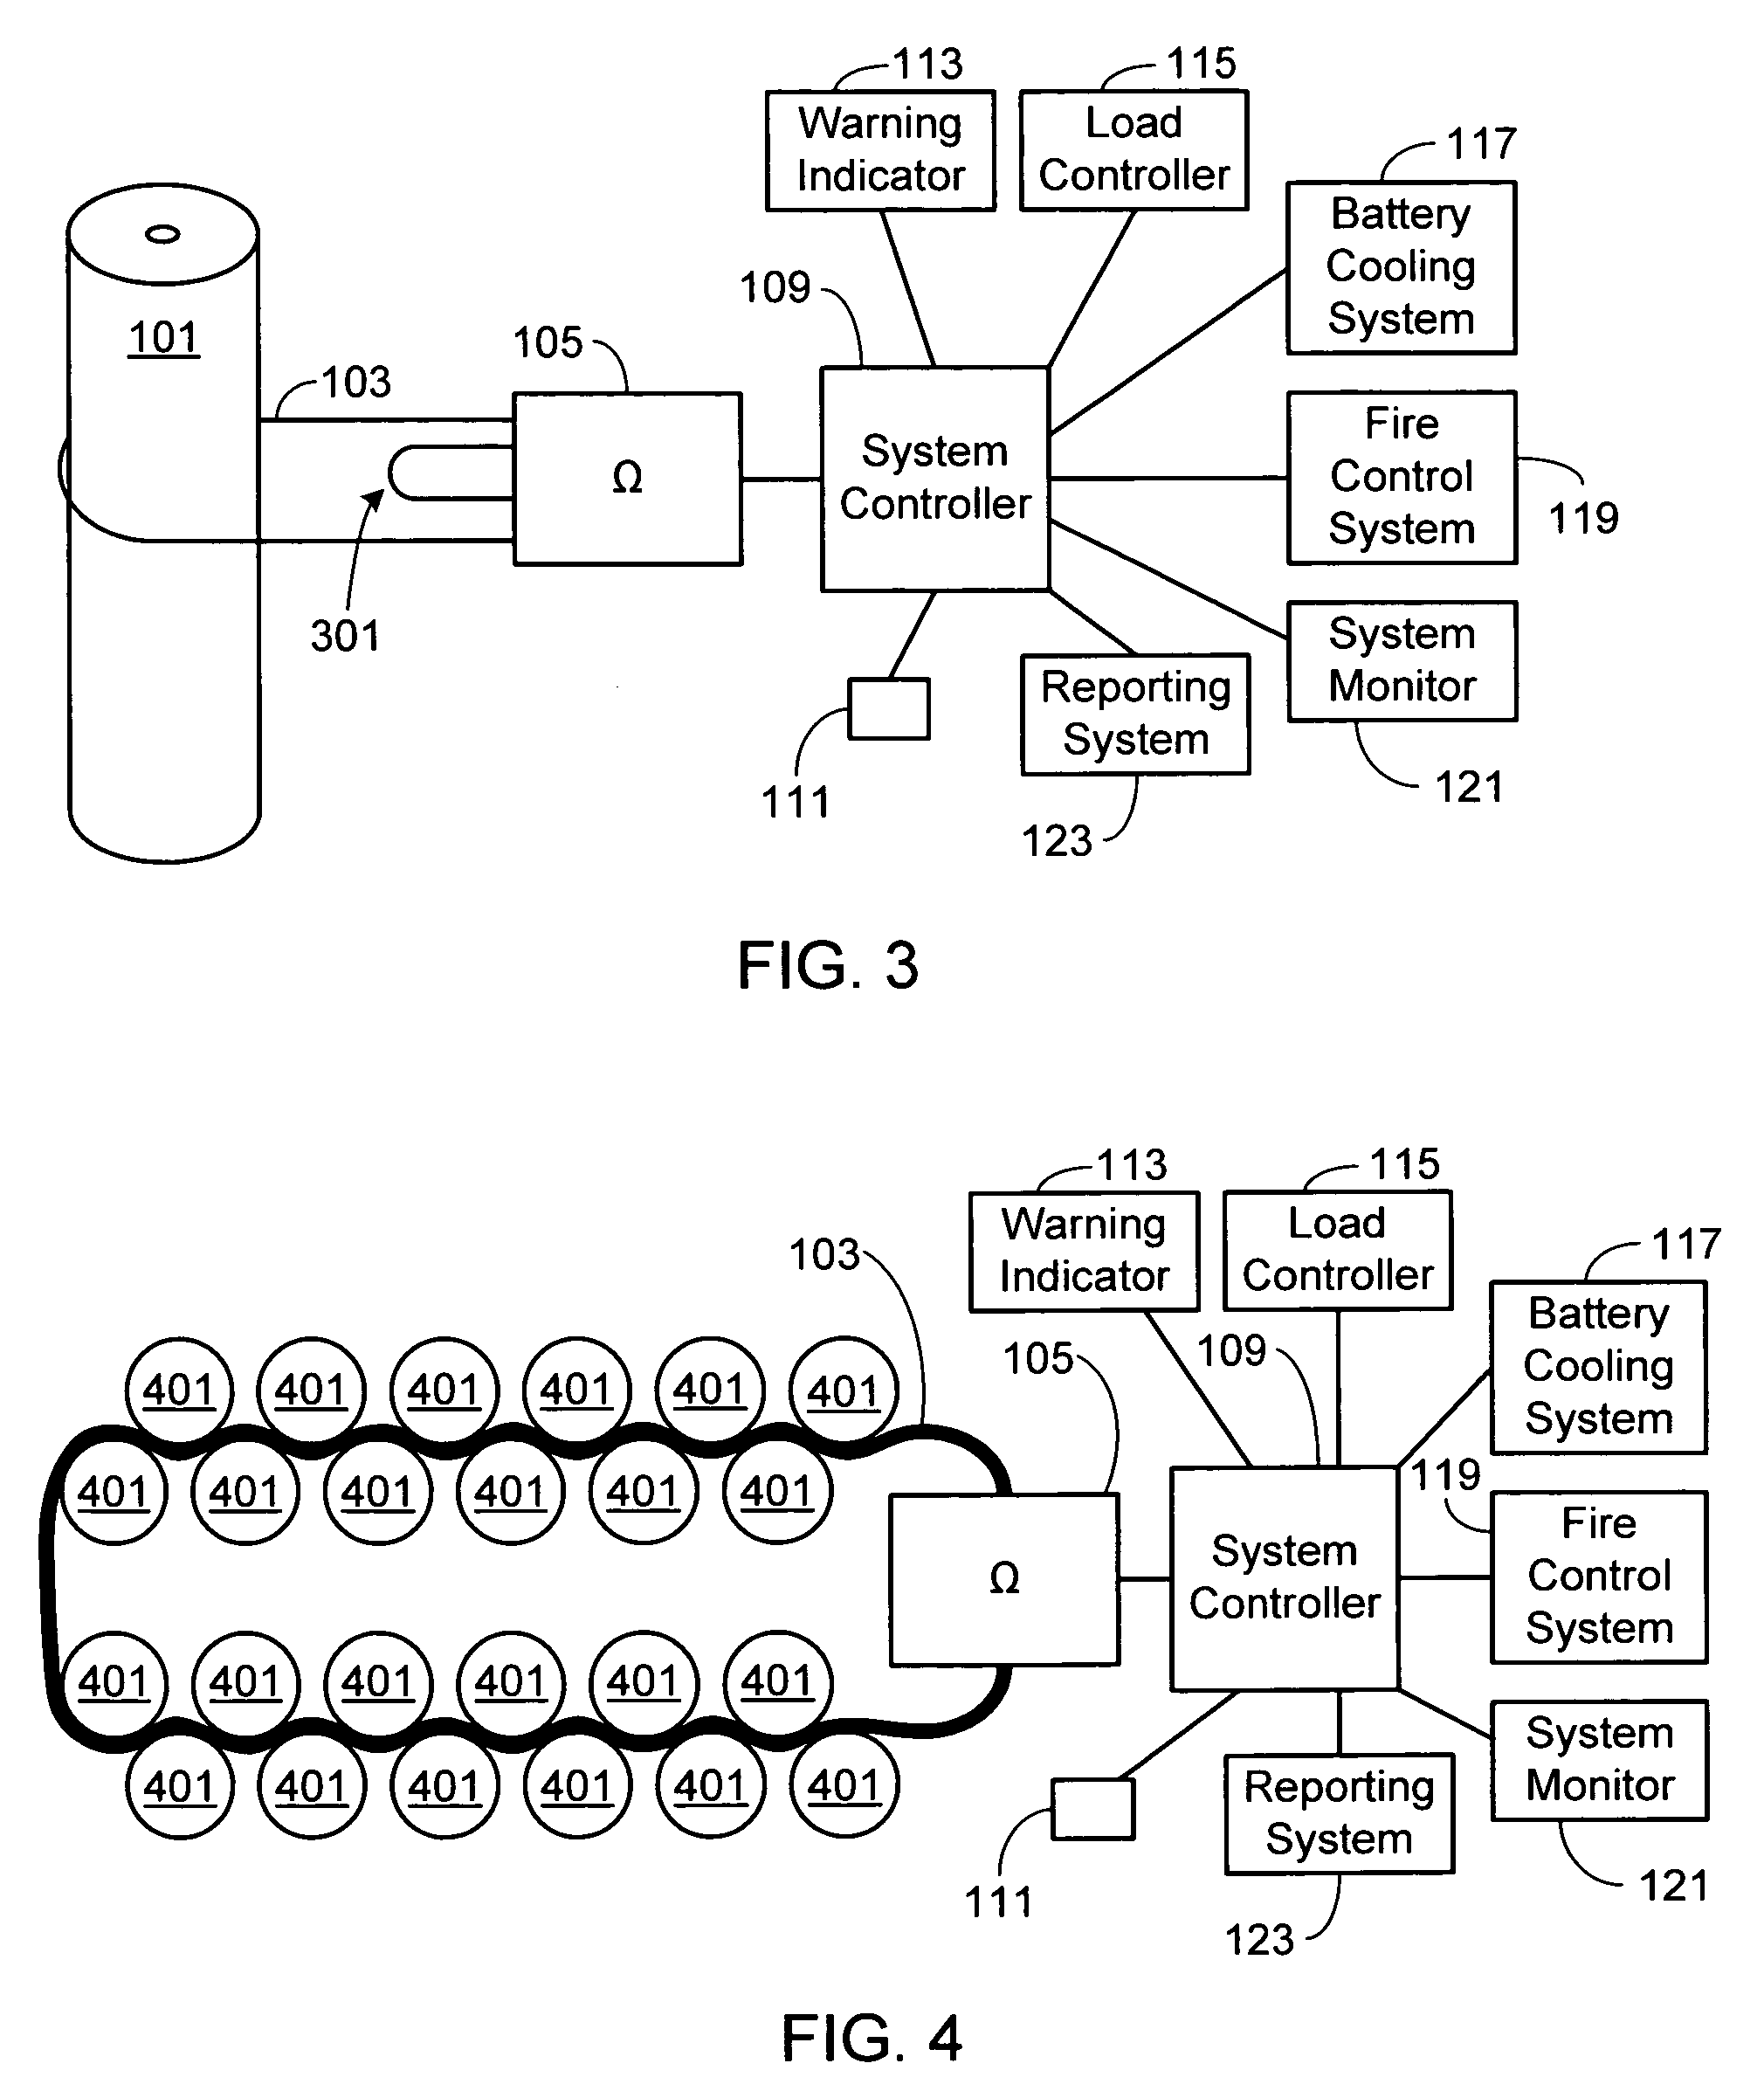 Battery thermal event detection system using a thermally interruptible electrical conductor